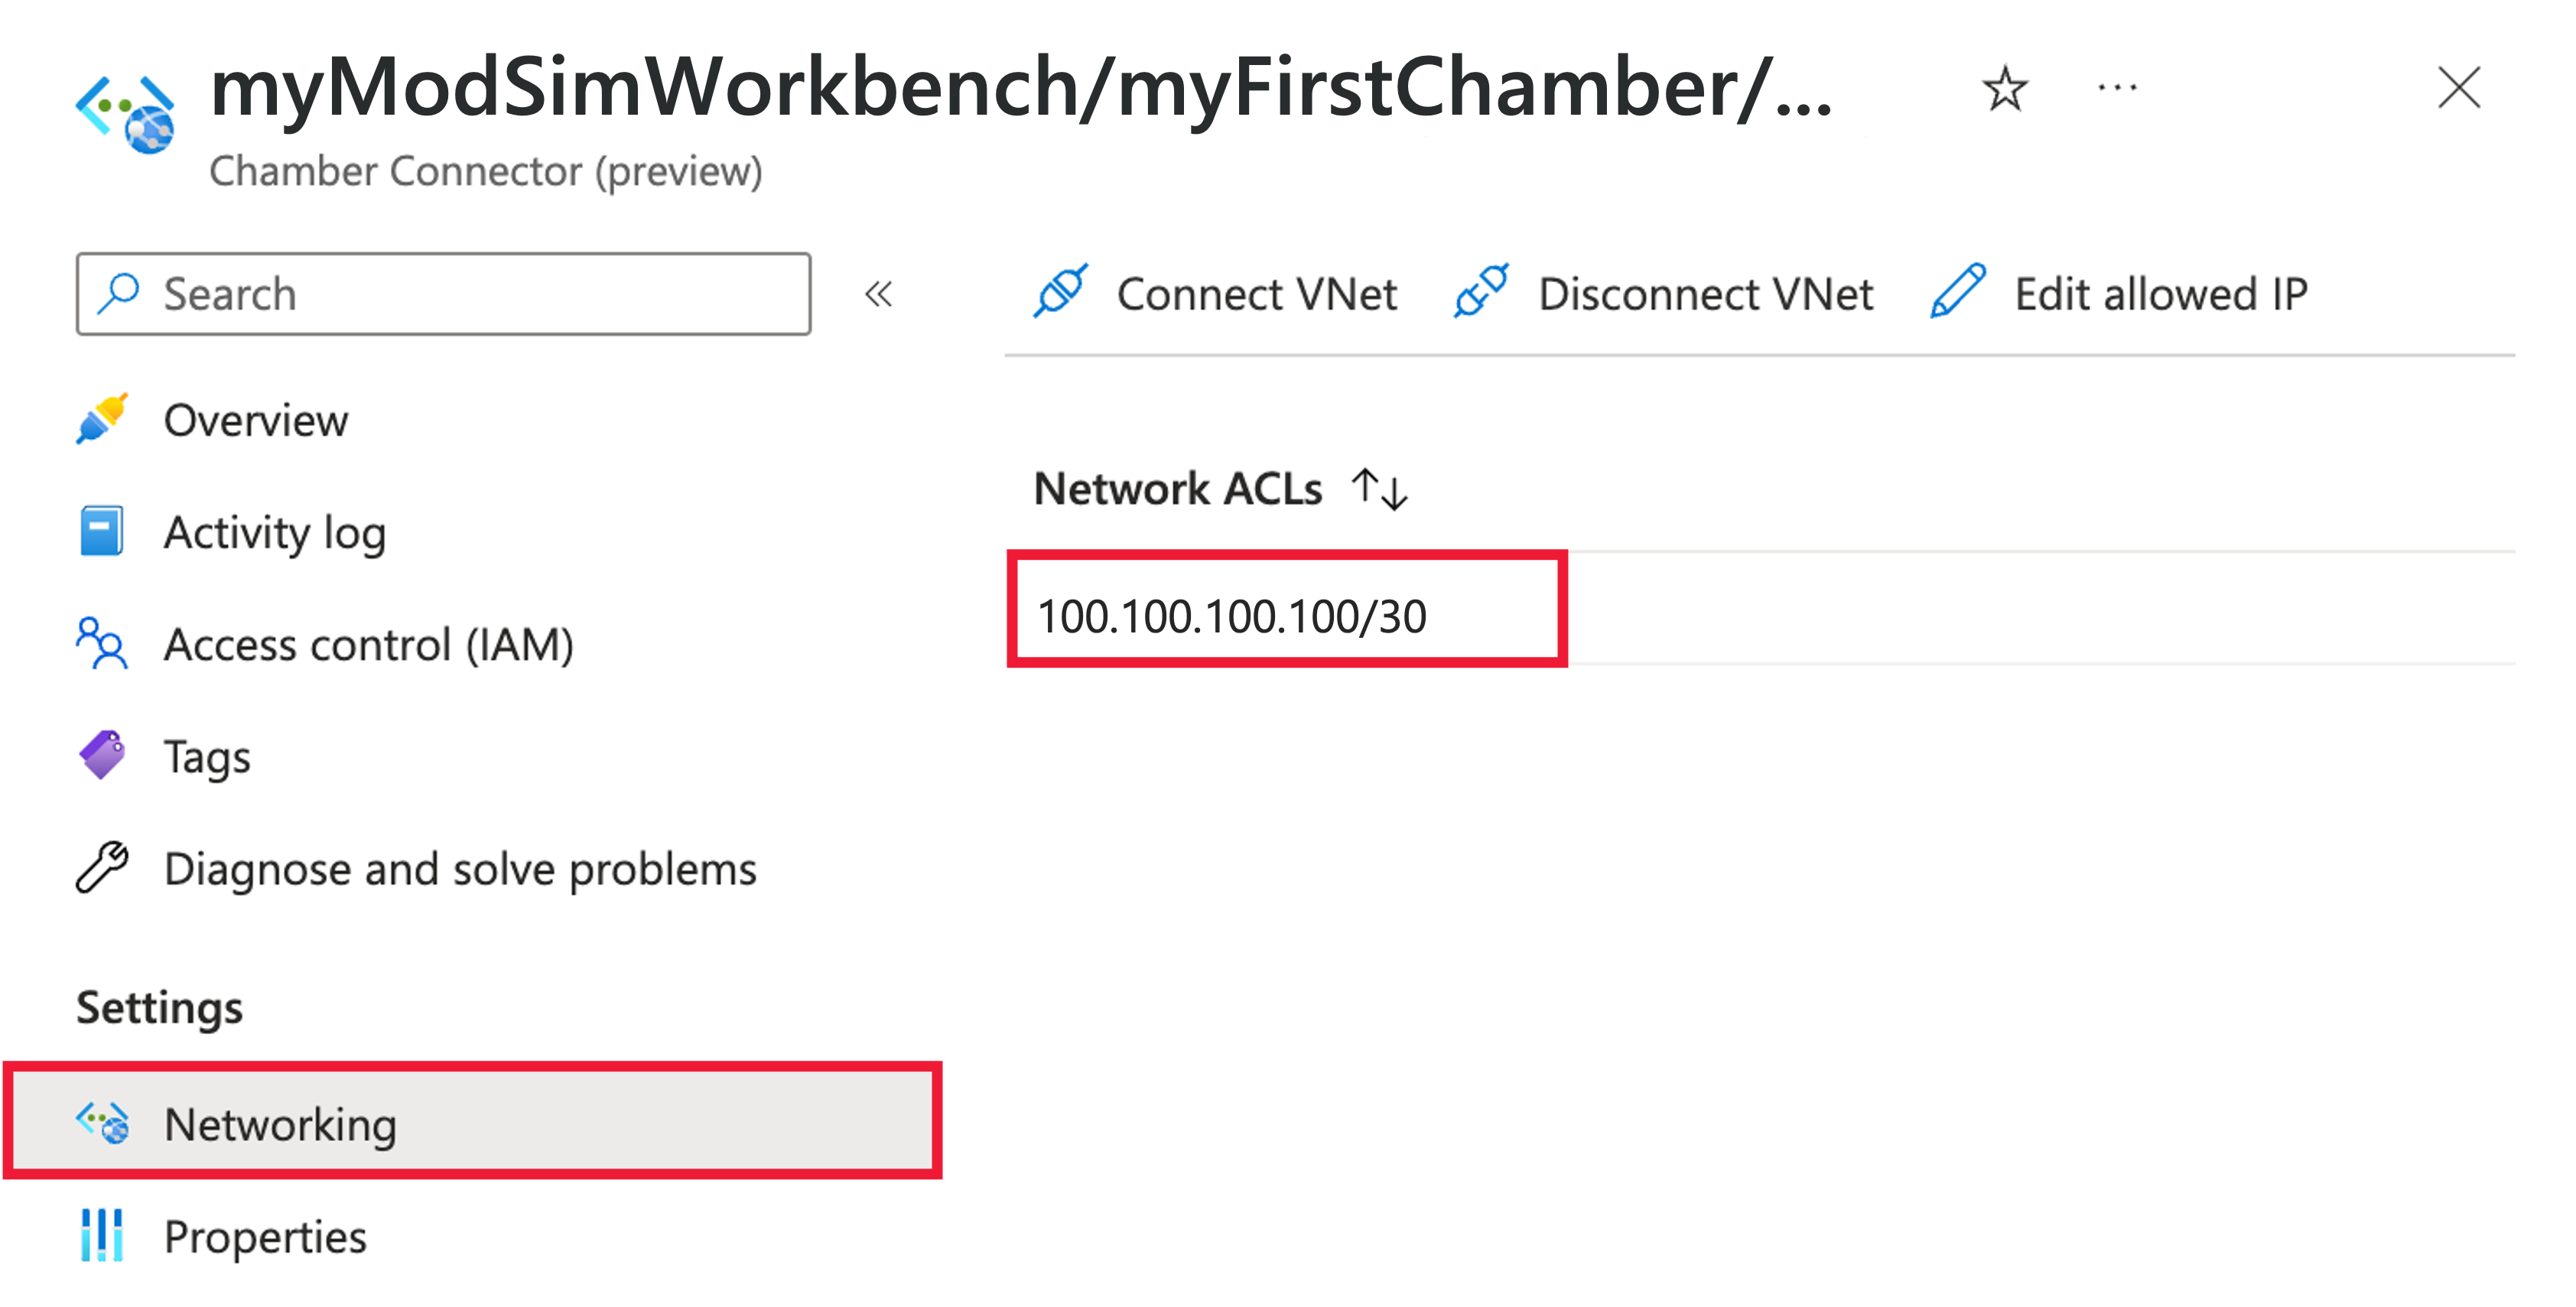 Screenshot of the Azure portal in a web browser, showing the allowlist for chamber connector networking.